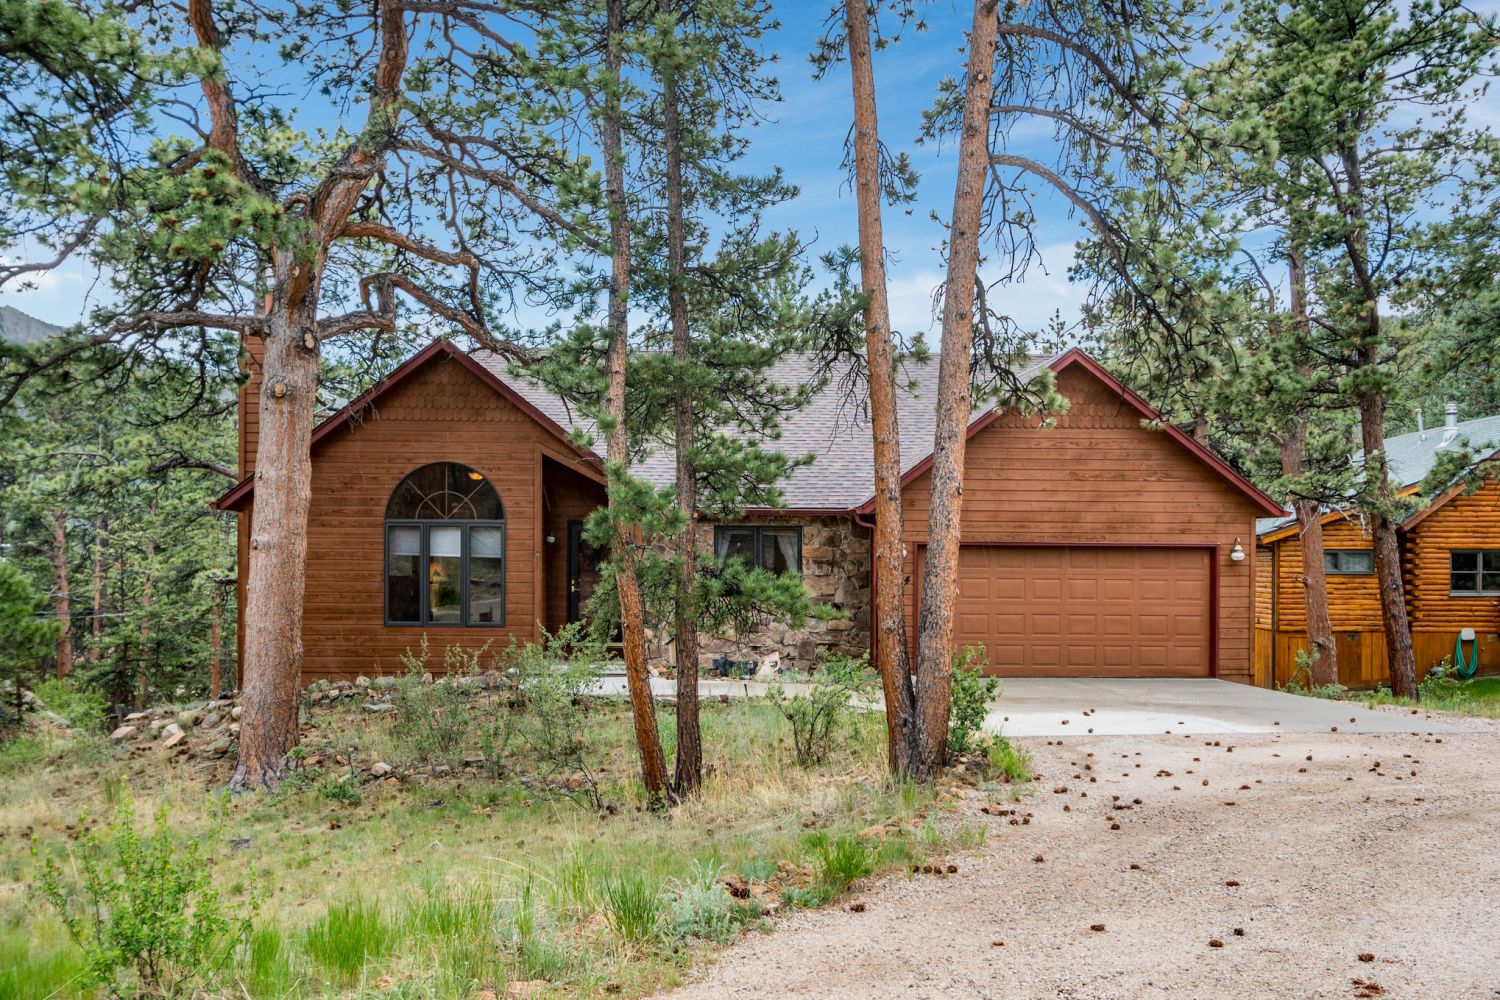 Heavenly Pines - Heavenly Pines Estes Park, Driveway to the main entrance of the home. Parking available for 3 vehicles. 